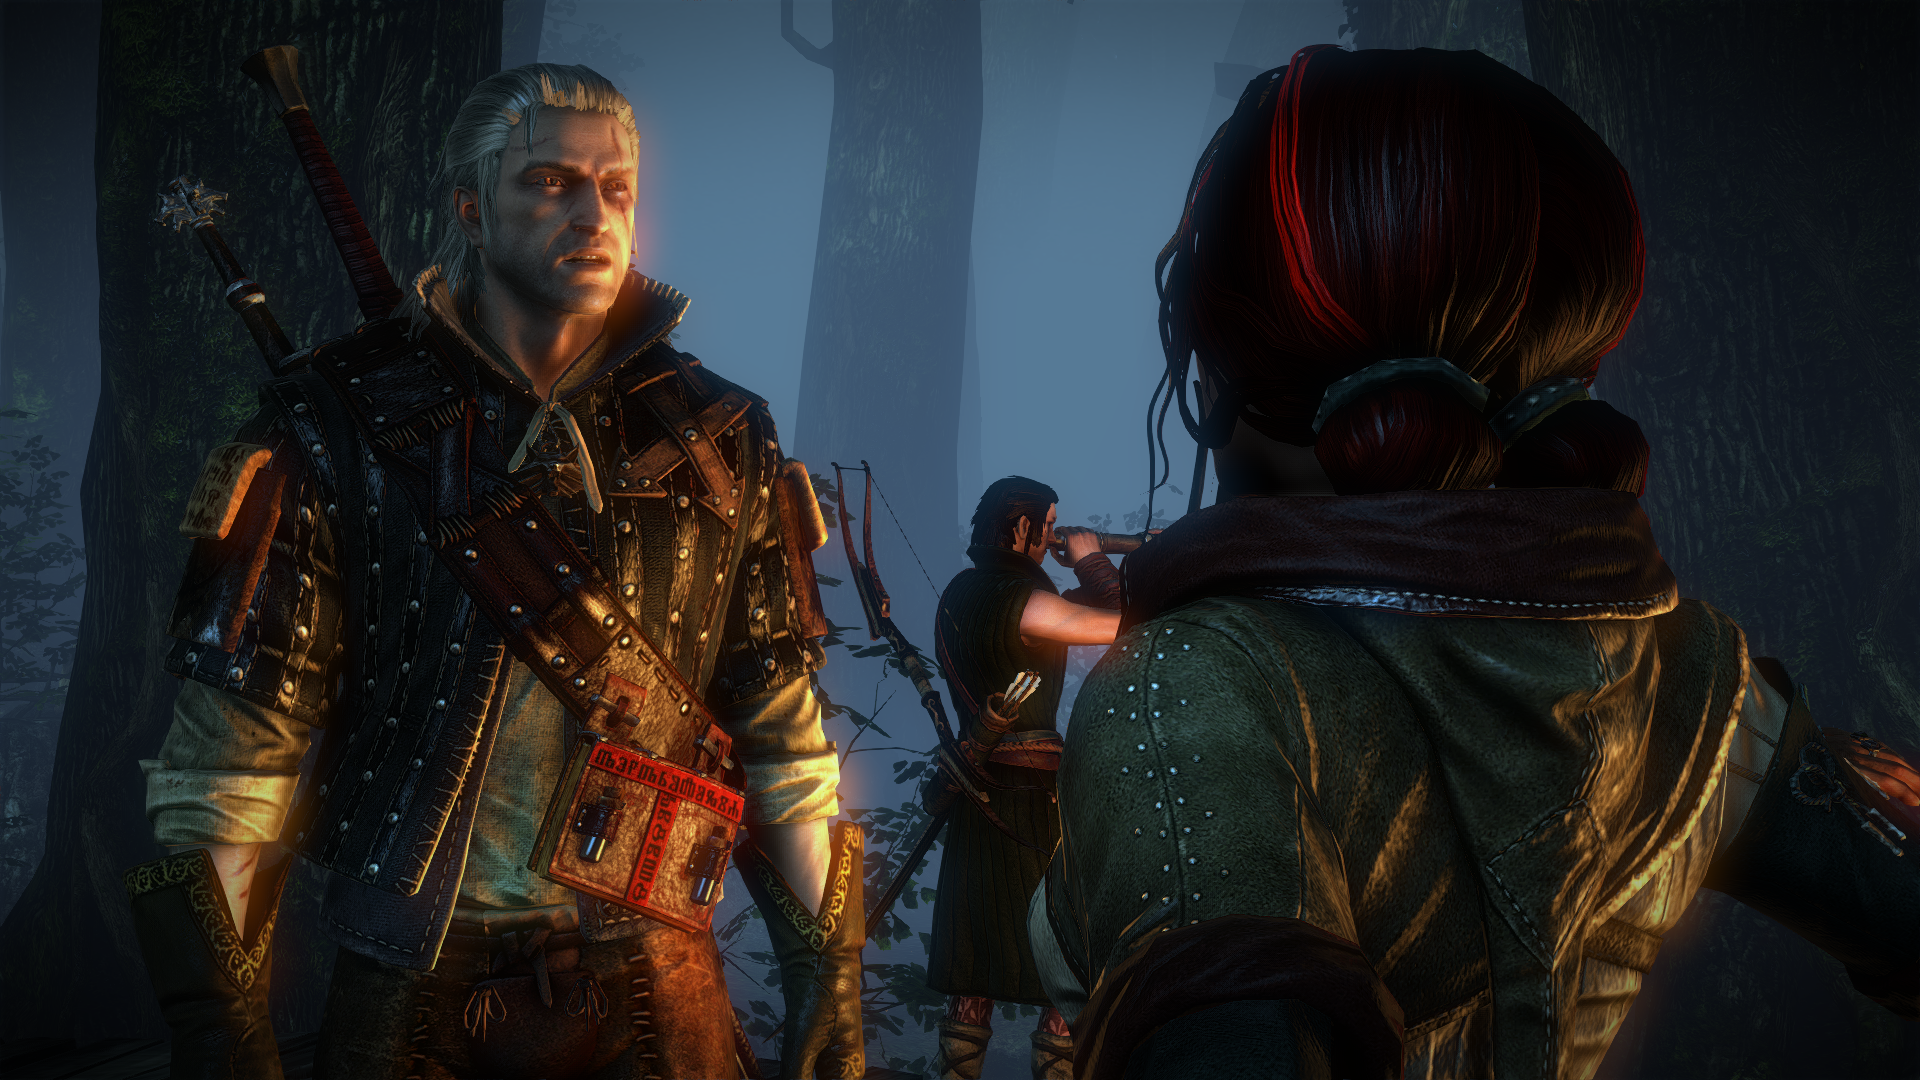 witcher22012-05-2301-yl8y1.png